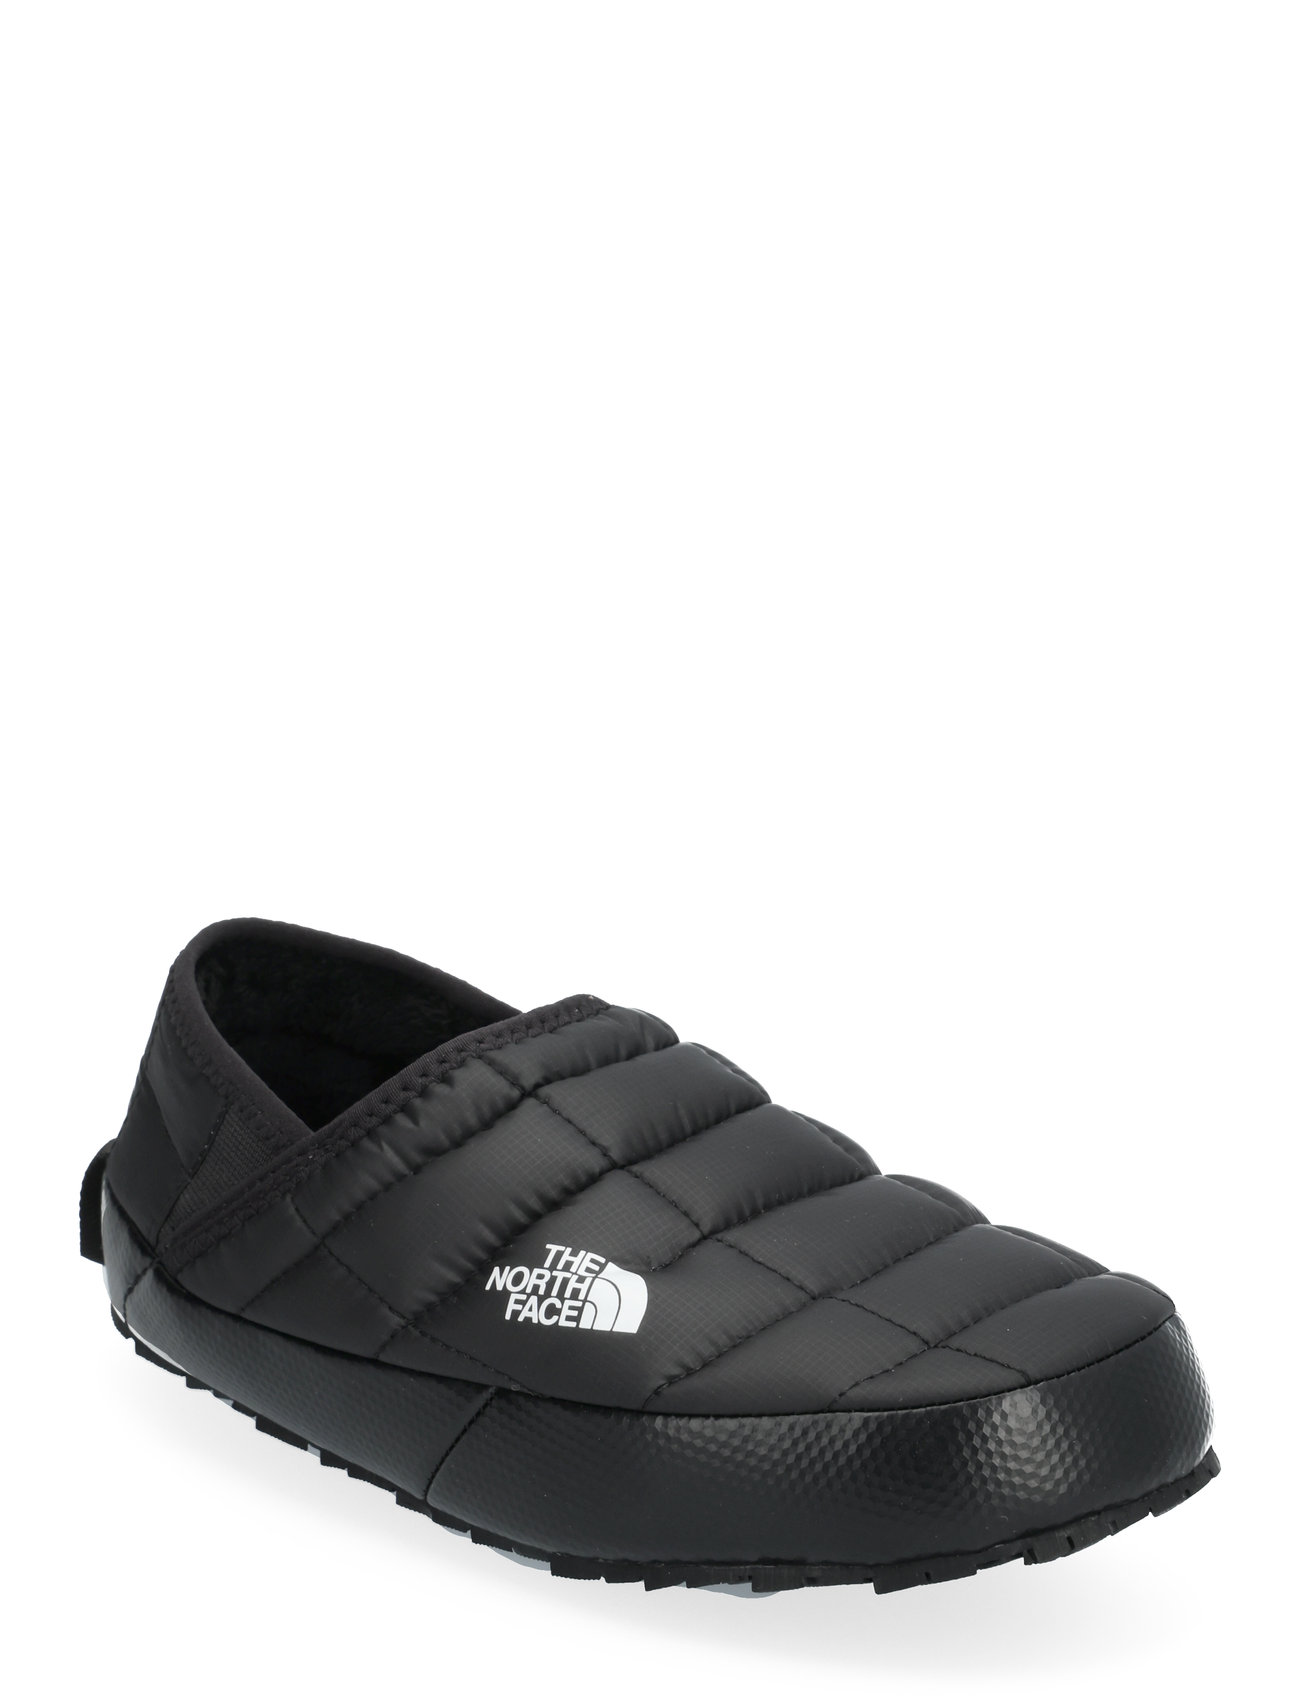 W Thermoball Traction Mule V Sport Sneakers Slip On Sneakers Black The North Face